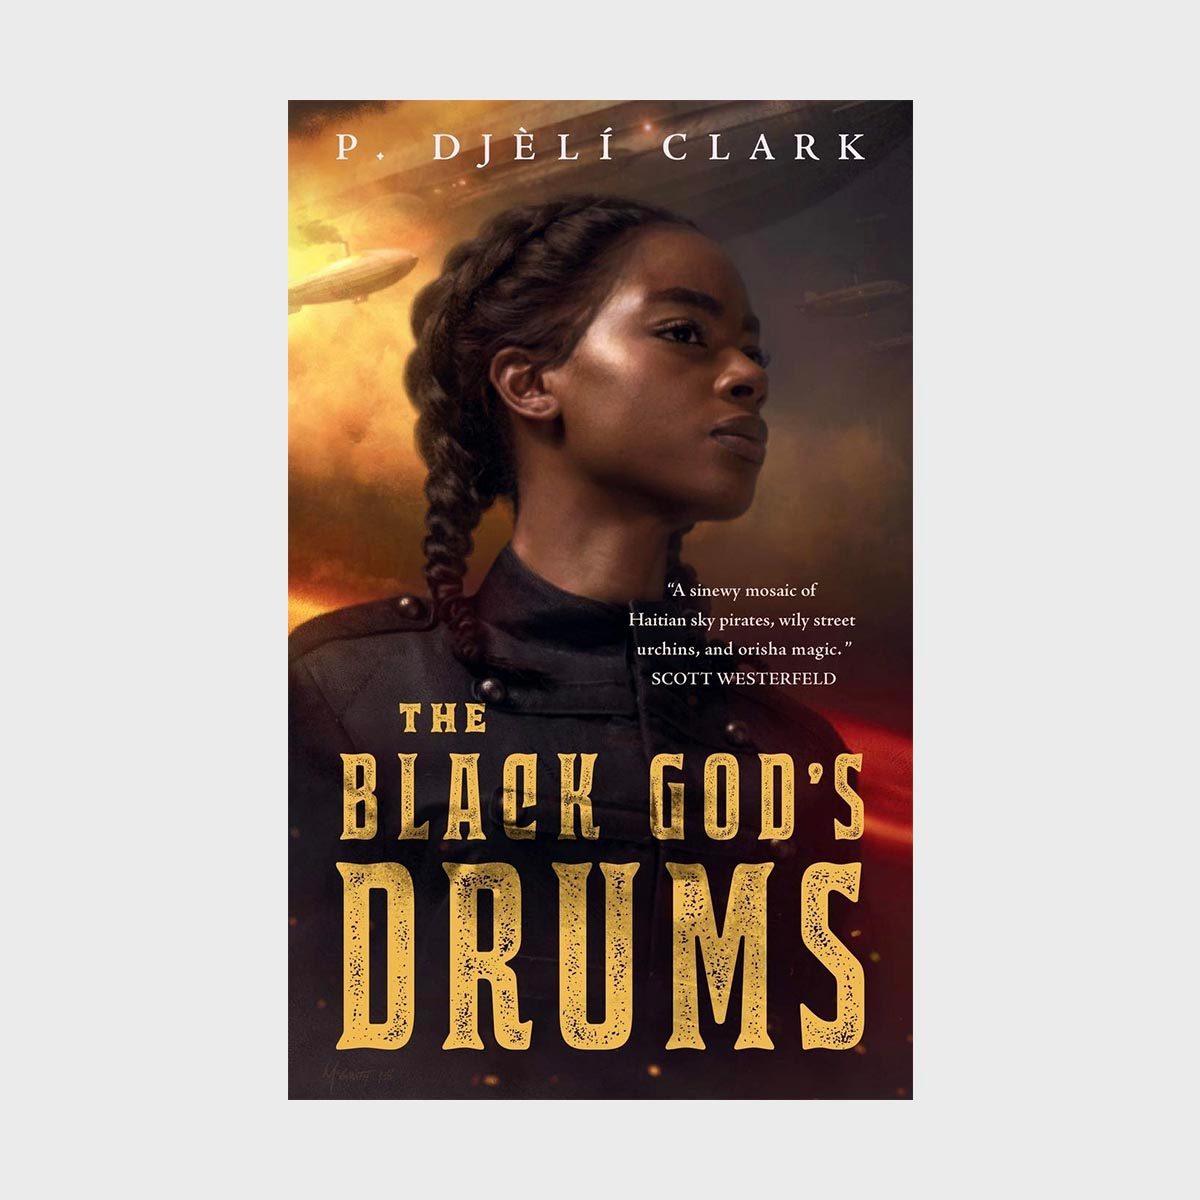 <p><strong>Release date:</strong> Aug. 21, 2018</p> <p>P. Djèlí Clark's Alex Award–winning <a href="https://www.amazon.com/Black-Gods-Drums-Dj%C3%A8l%C3%AD-Clark/dp/1250294711/" rel="noopener noreferrer"><em>The Black God's Drums</em></a> takes place in an alternate New Orleans caught in the middle of the Civil War. Creeper is a wall-scaling girl who longs to escape the city and catch a flight on the airship <em>Midnight Robbe. </em> She uses top-secret information about a Haitian scientist and a mysterious weapon called the Black God's Drums to secure a spot on the flight. But Creeper harbors her own secret: She carries the voice of Oya, an African orisha, in her head. Creeper, Oya and the airship's crew embark on a perilous mission to prevent the devastating weapon from destroying New Orleans. If you're looking for more <a href="https://www.rd.com/list/books-by-black-authors/" rel="noopener noreferrer">books by Black authors</a> to add to your shelves, definitely pick up a copy of this must-read novel.</p> <p class="listicle-page__cta-button-shop"><a class="shop-btn" href="https://www.amazon.com/Black-Gods-Drums-Dj%C3%A8l%C3%AD-Clark/dp/1250294711/">Shop Now</a></p>